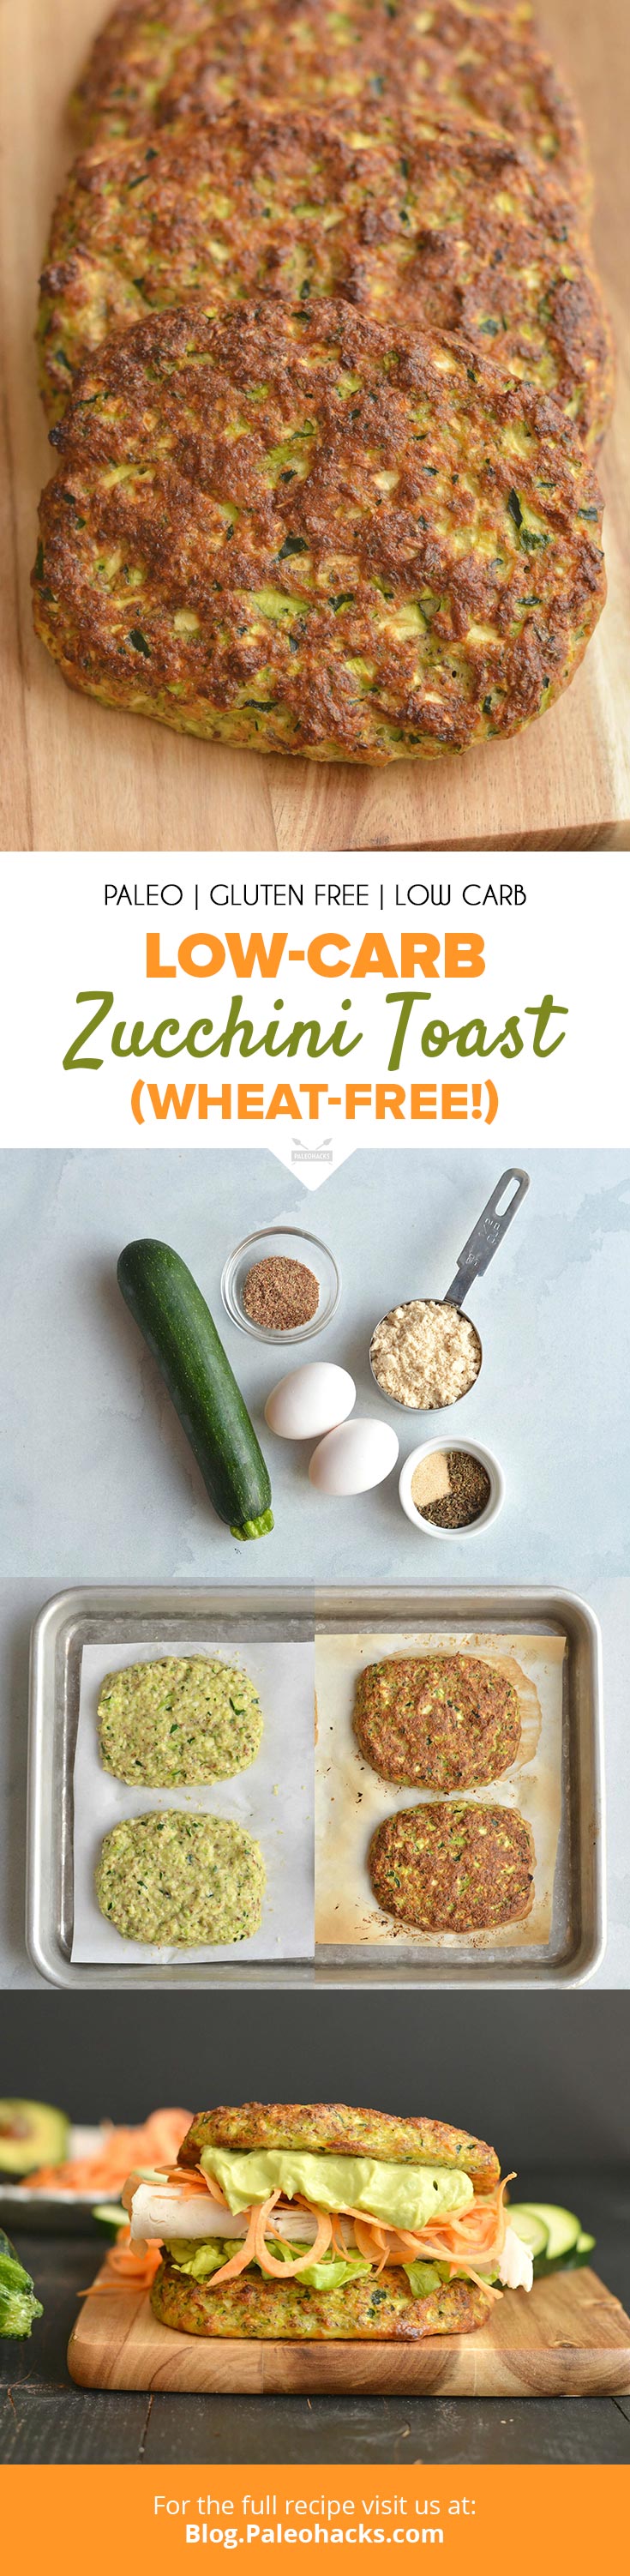 This Low-Carb Zucchini Toast is thick, delicious and takes less than 40 minutes to make. Fold it, fill it, or finish it with your favorite spread.